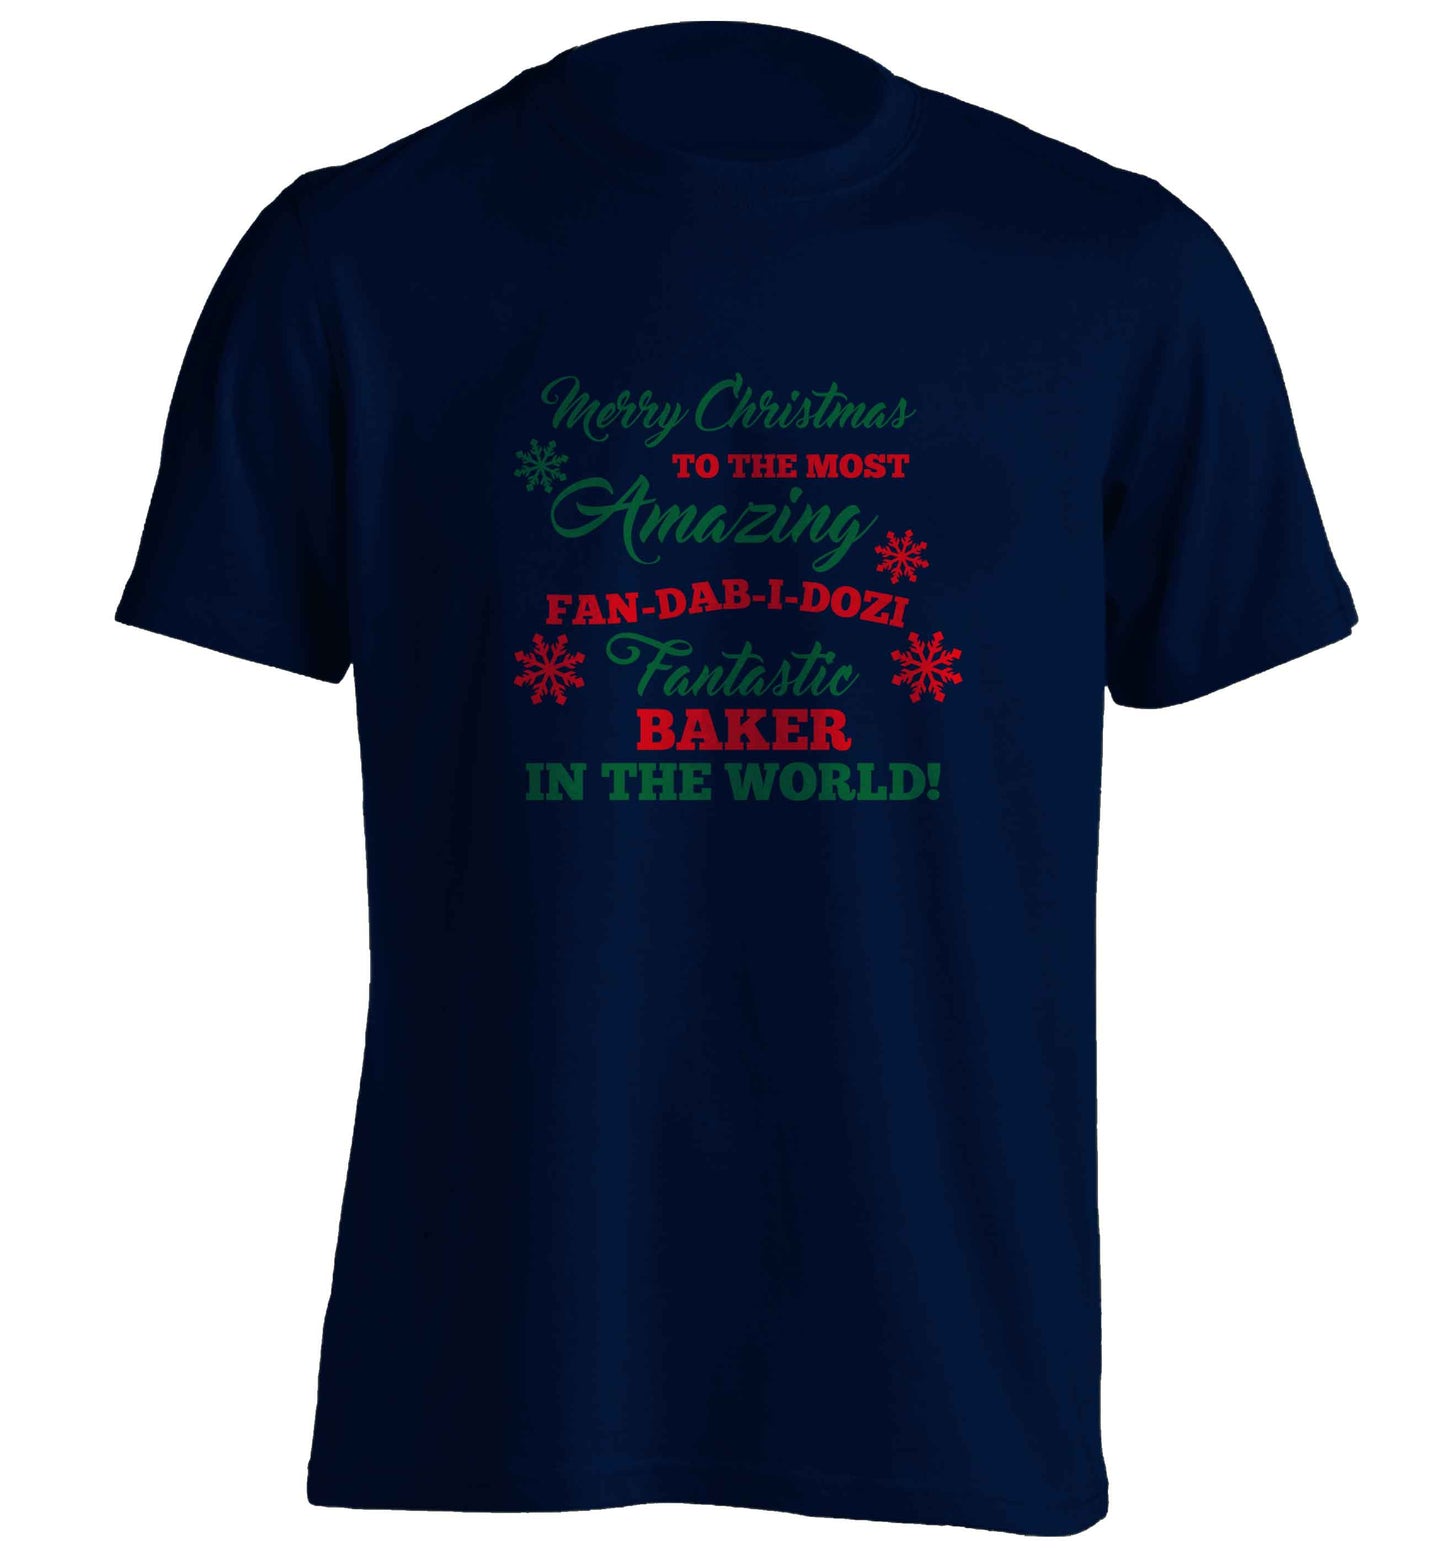 Merry Christmas to the most amazing baker in the world! adults unisex navy Tshirt 2XL